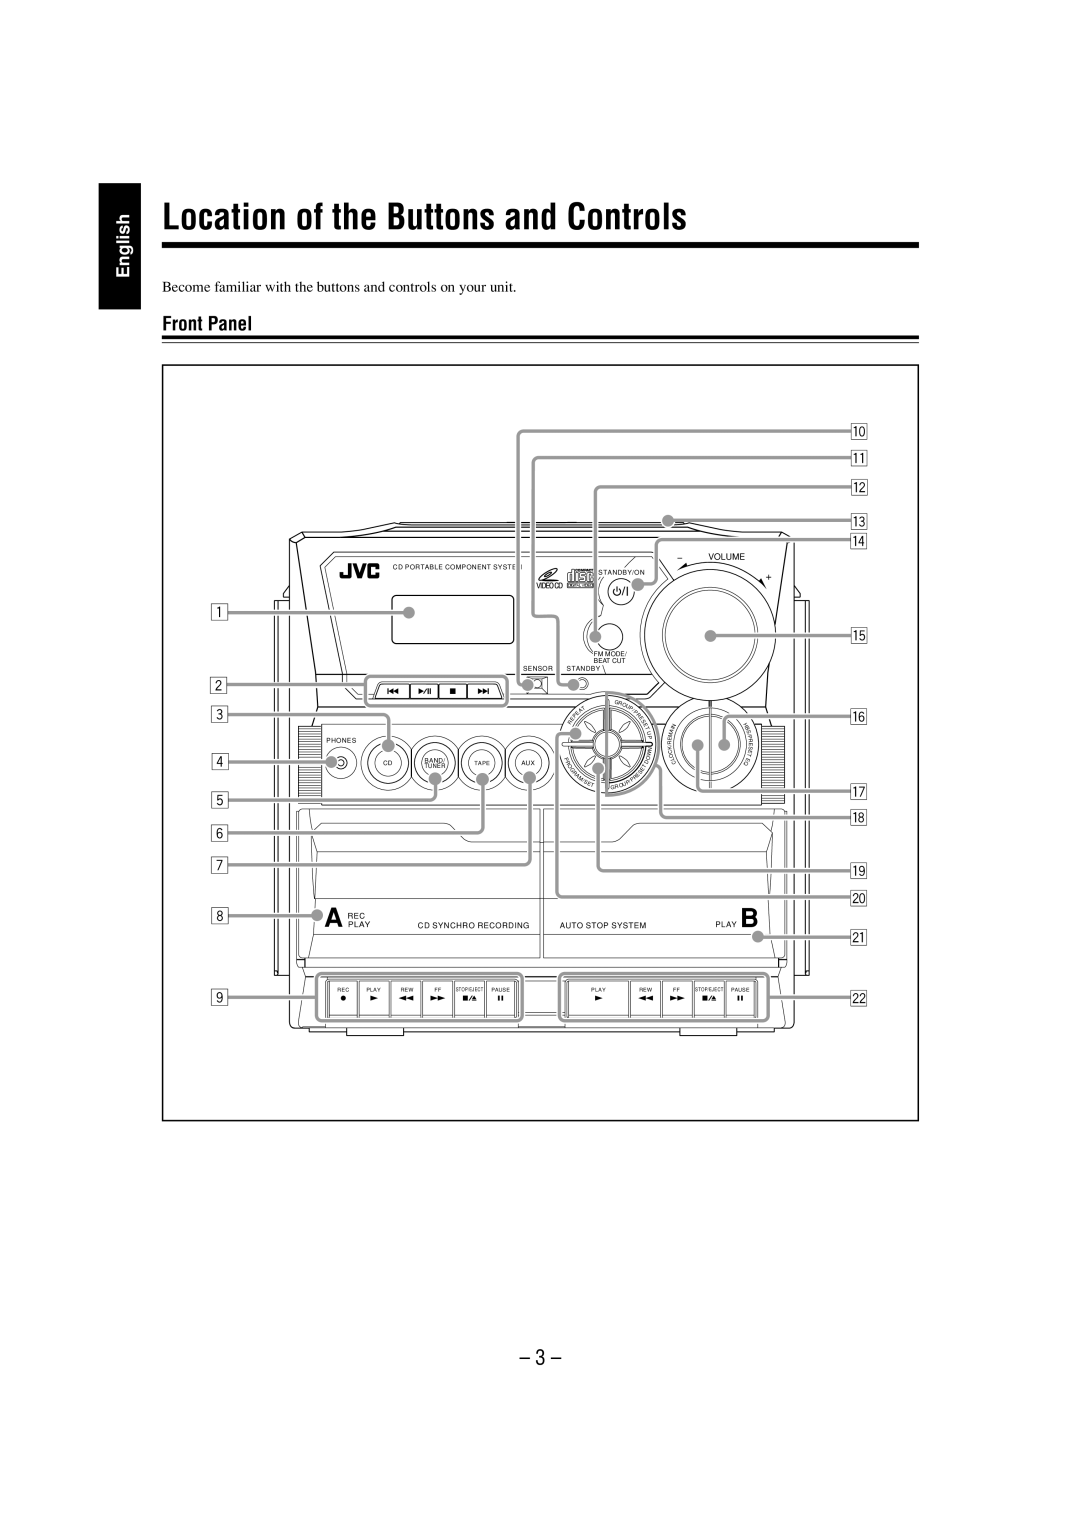 JVC PC-X292V, LVT1370-001A manual Location of the Buttons and Controls, Front Panel, English 